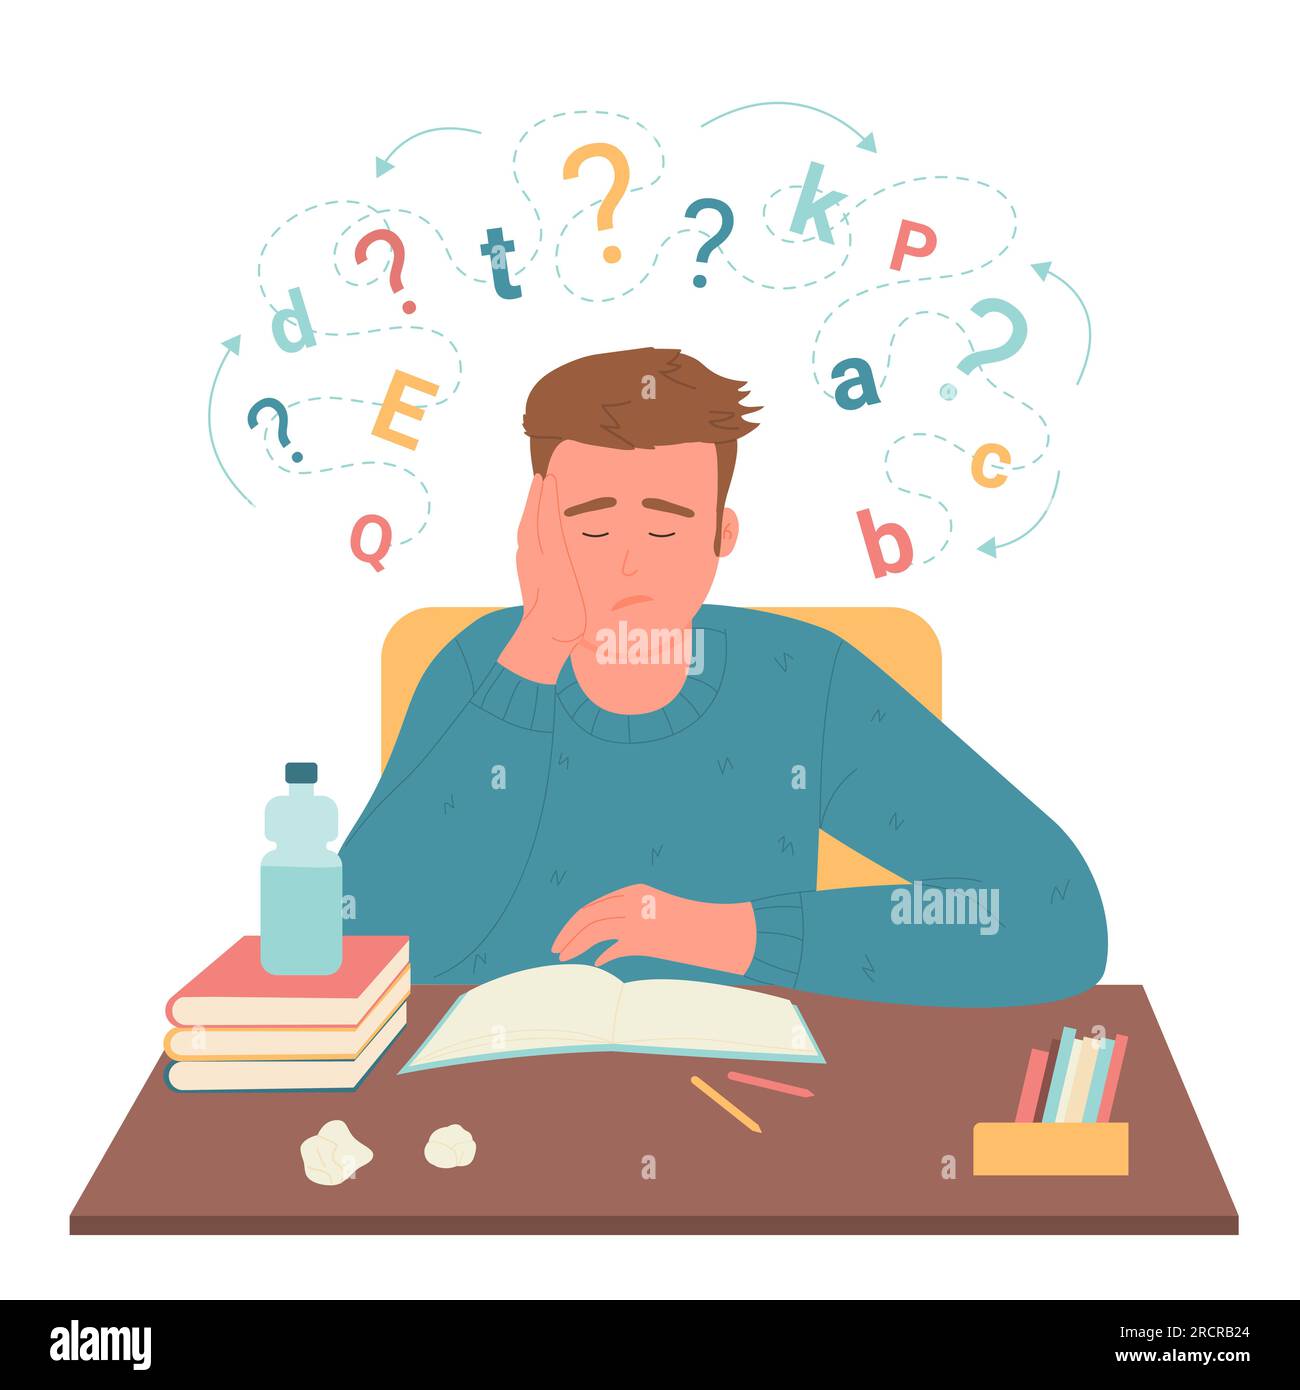 Problems in learning and literacy, dysgraphia and dyslexia disability vector illustration. Cartoon dyslexic confused student sitting at desk with cloud of letters, frustrated boy asking question Stock Vector